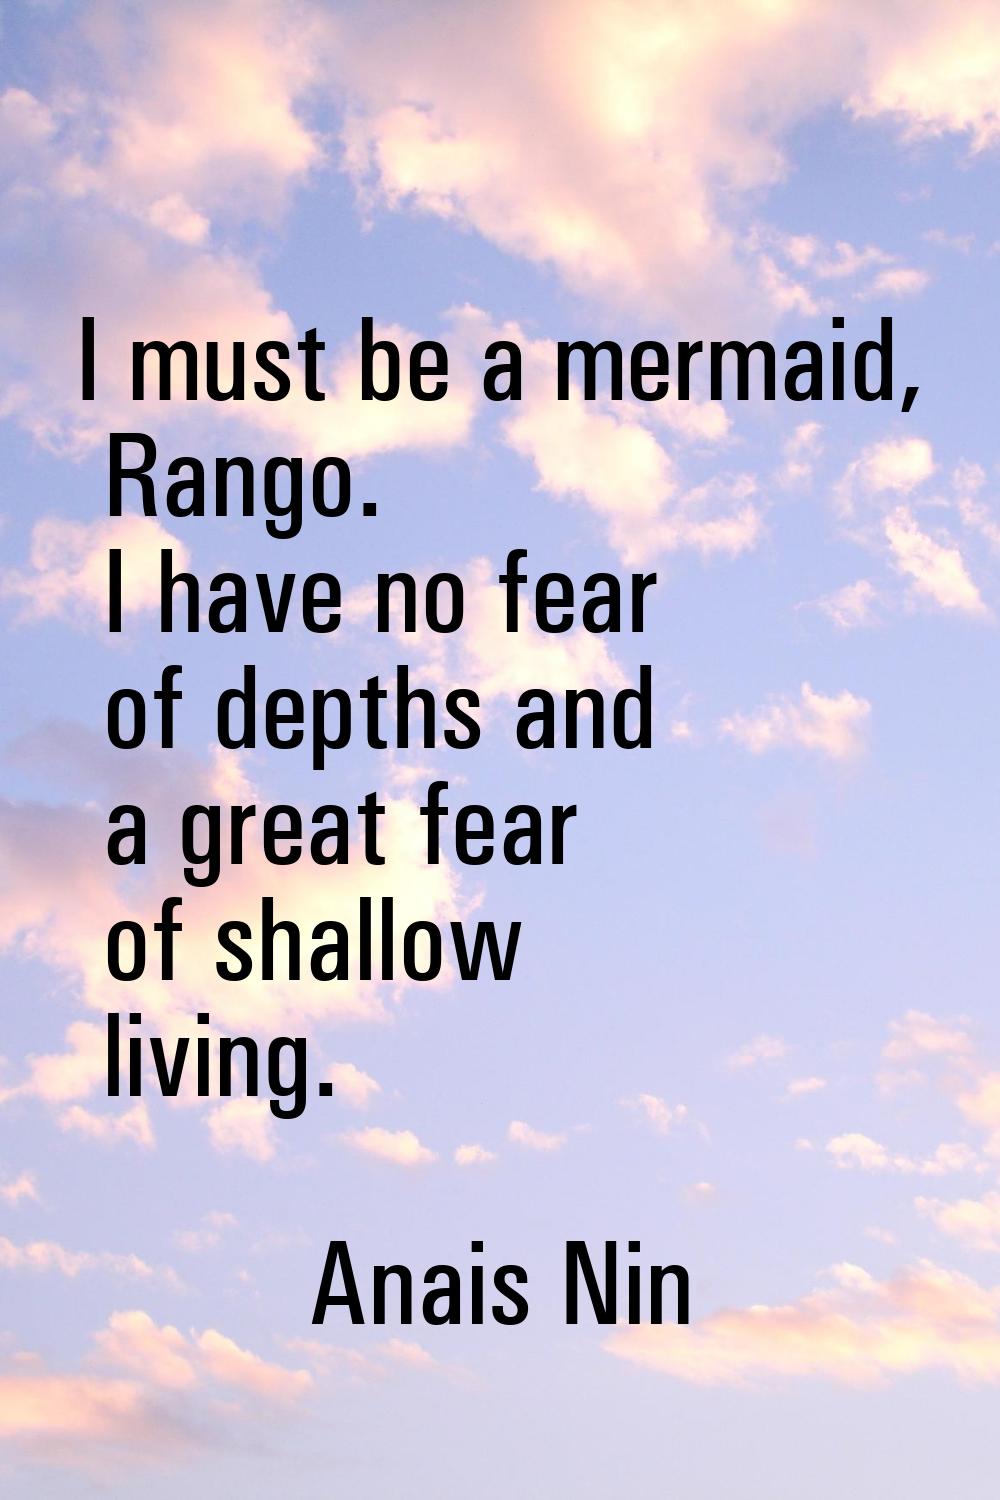 I must be a mermaid, Rango. I have no fear of depths and a great fear of shallow living.